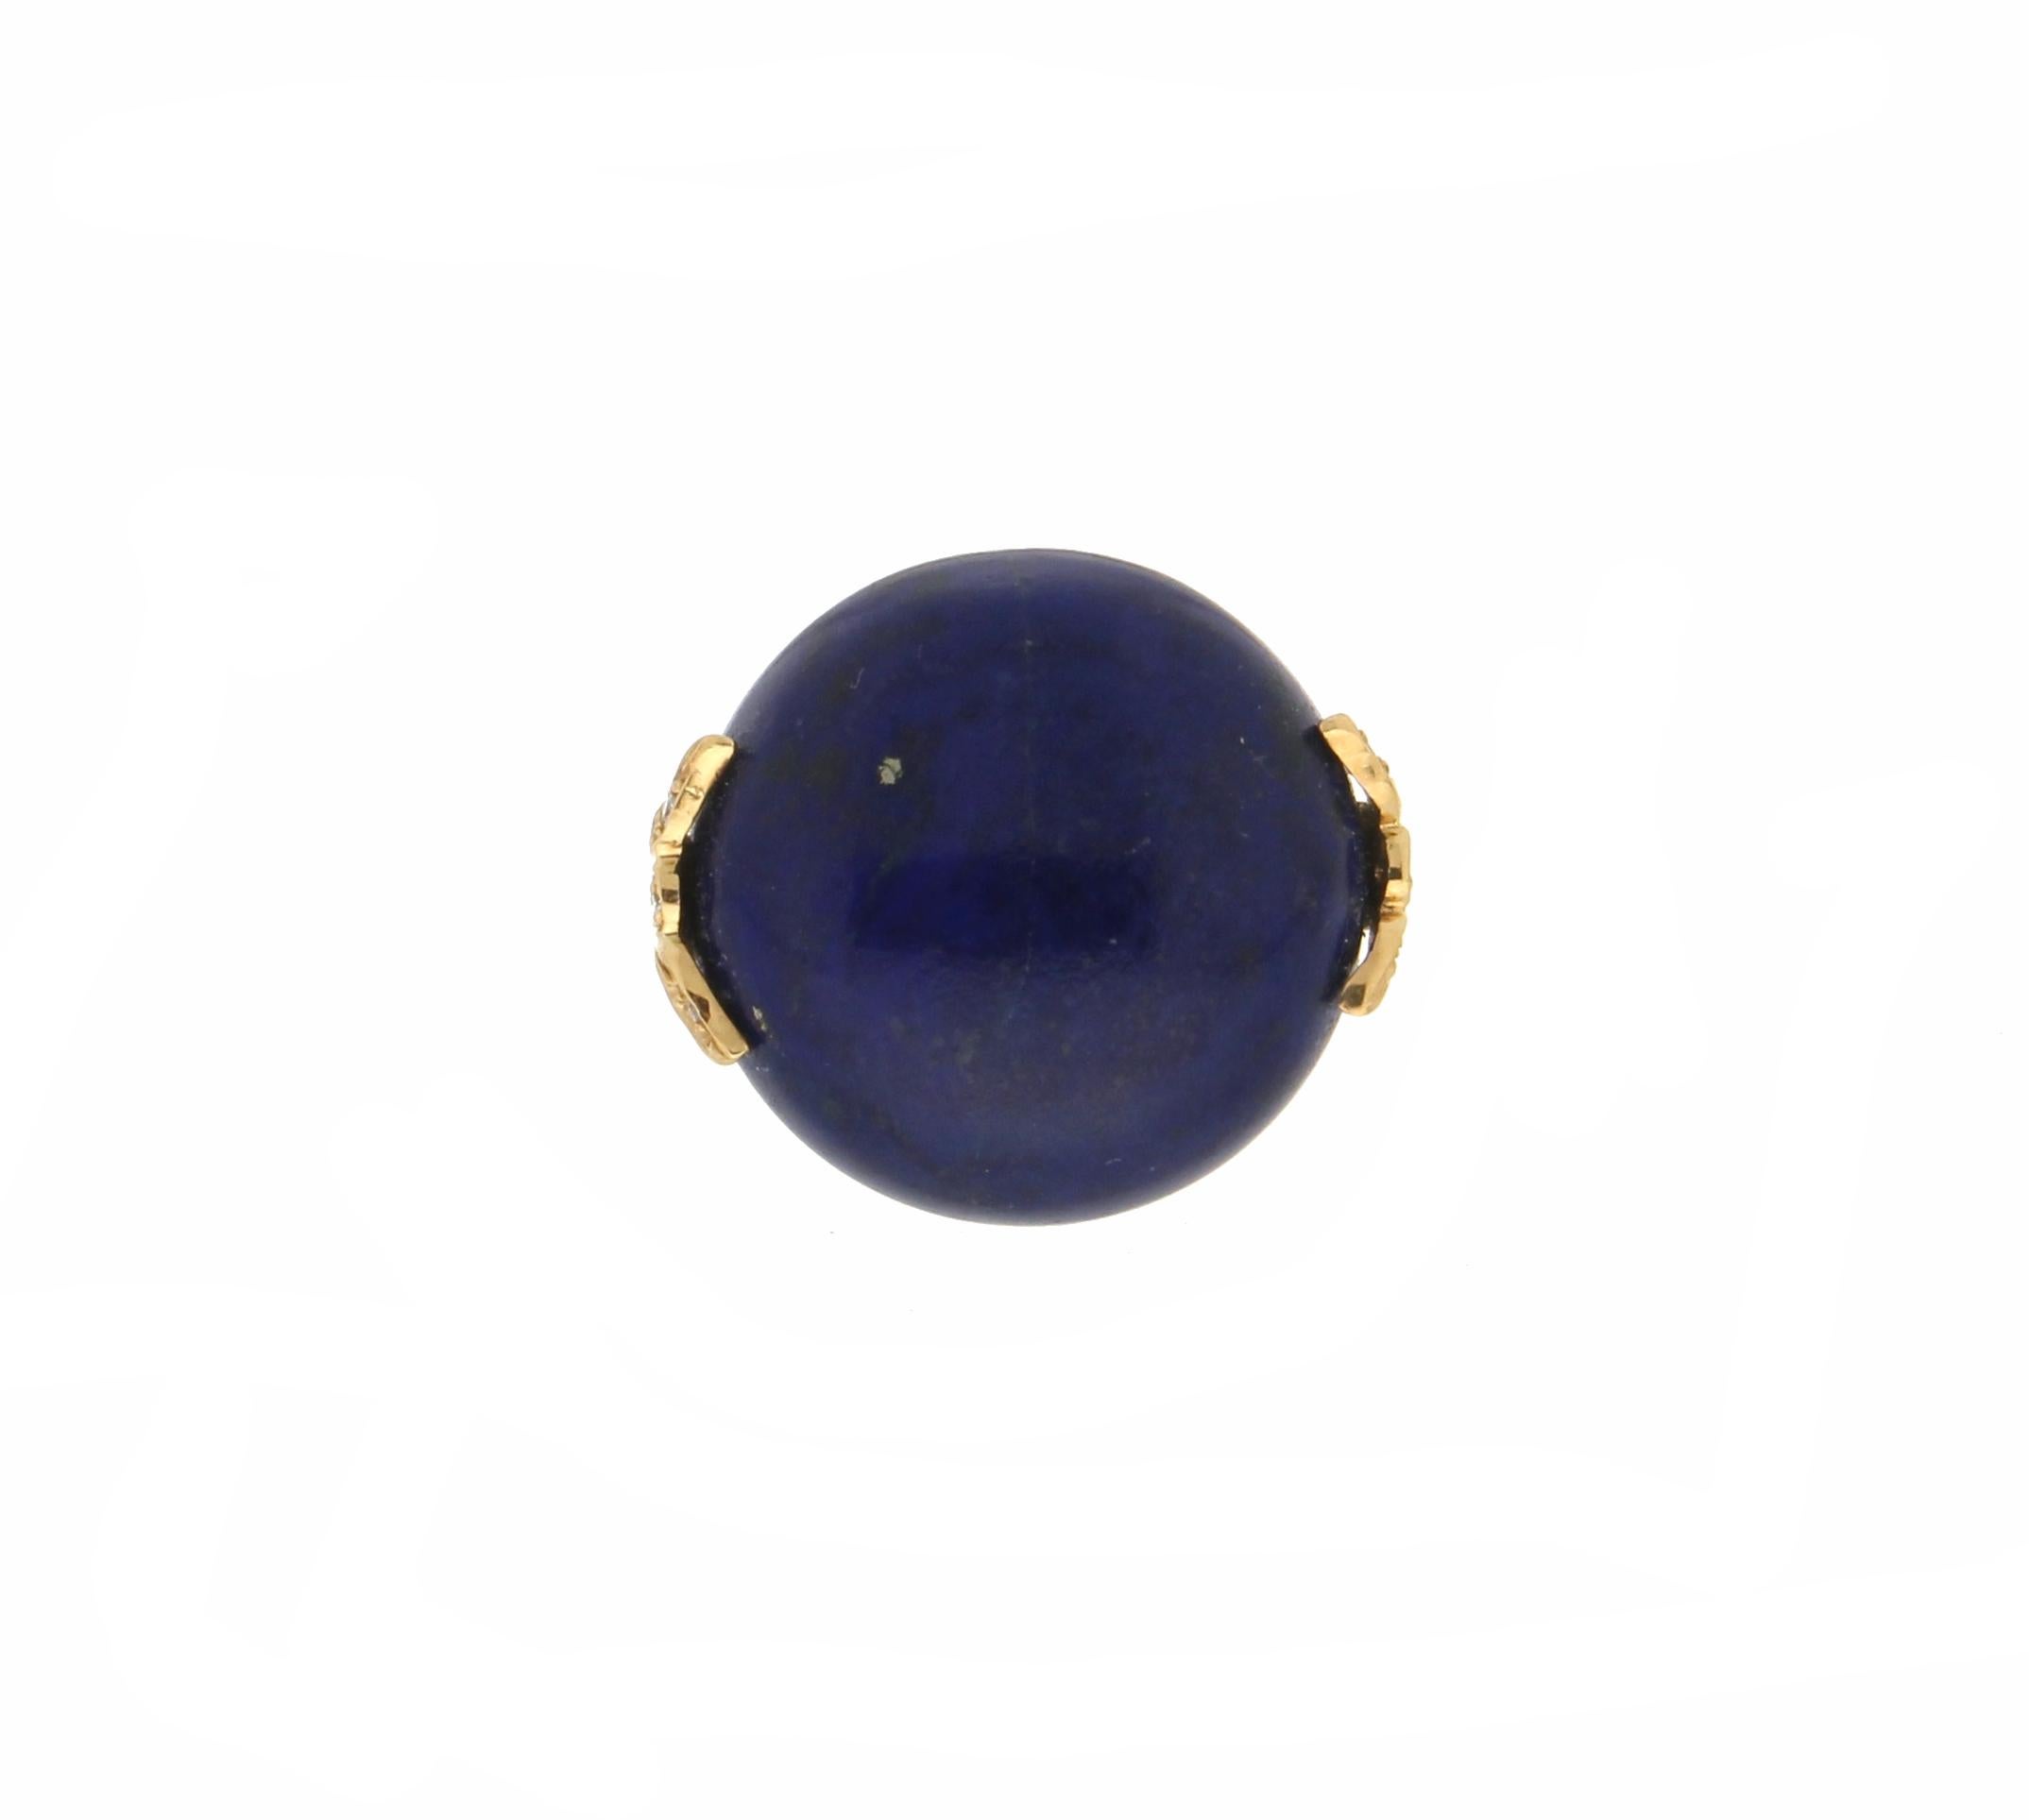 18 karat yellow gold cocktail ring. Handmade by our artisans assembled with lapis lazuli and diamonds.

Ring total weight 15.40 grams
Diamonds weight 0.05 karat
Lapis lazuli weight 8.50 grams
Ring size 16.50 Ita 7.75 Us
(all rings are can be resized)